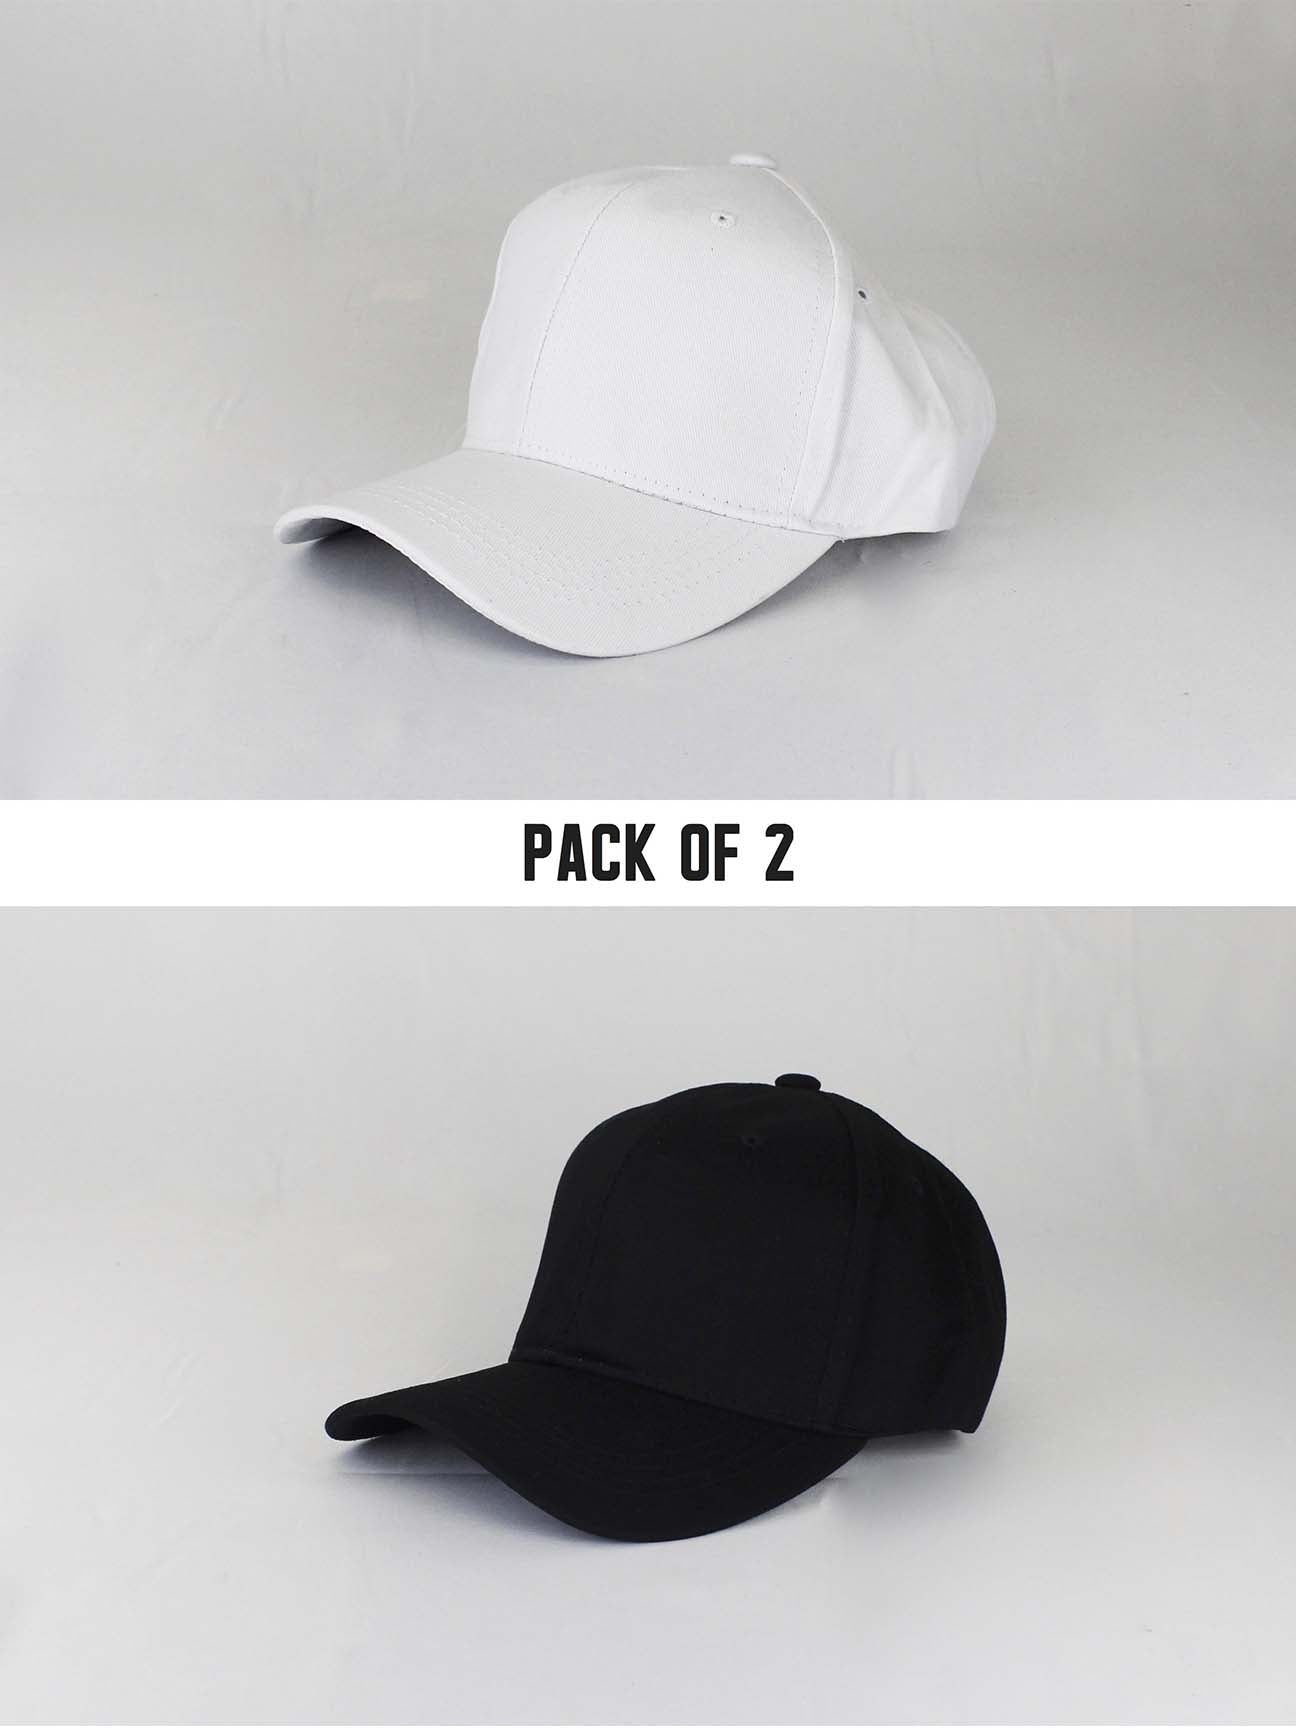 PACK OF 2 CAPS - svnx